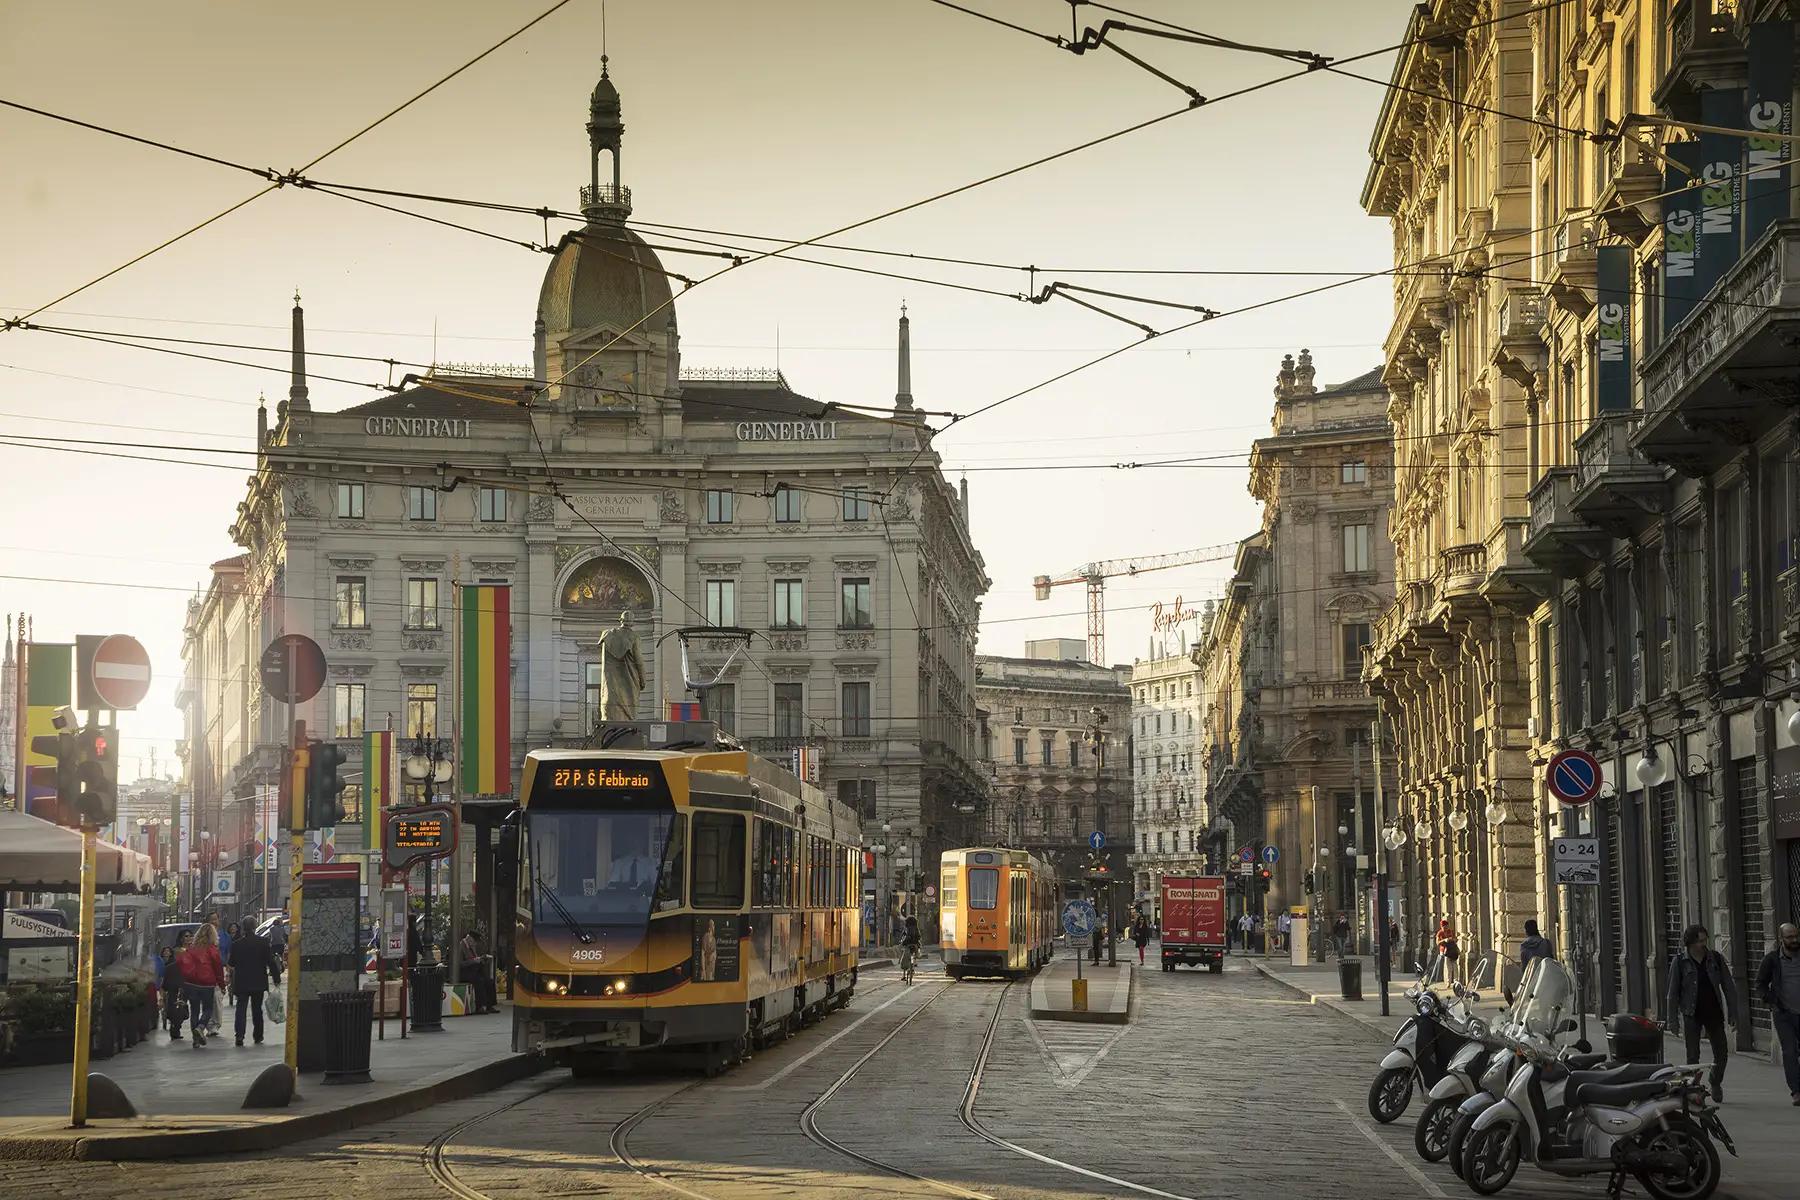 A tram in Piazza Cordusio, in the centre of Milan at sunset